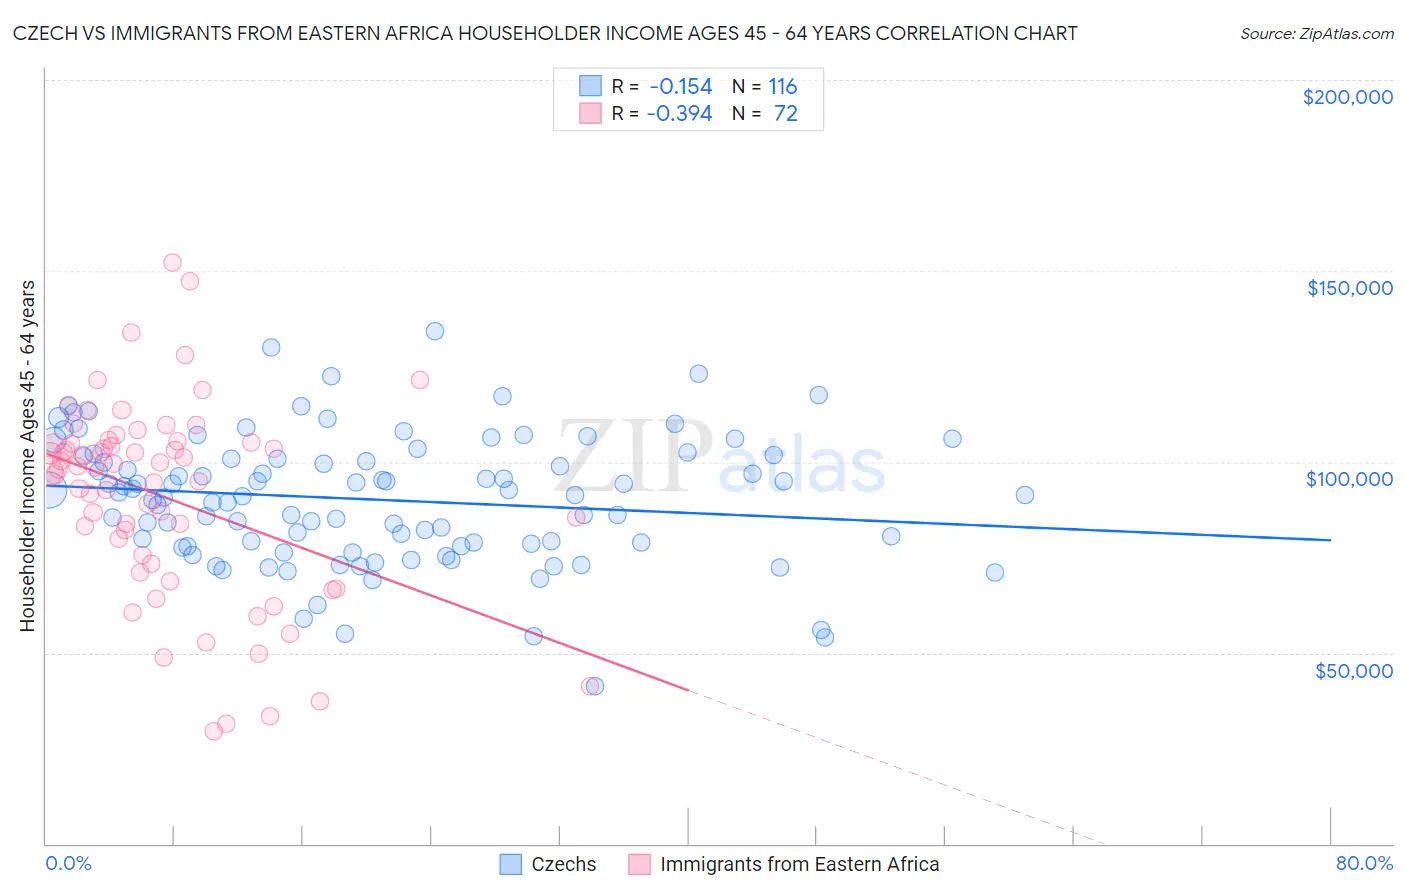 Czech vs Immigrants from Eastern Africa Householder Income Ages 45 - 64 years